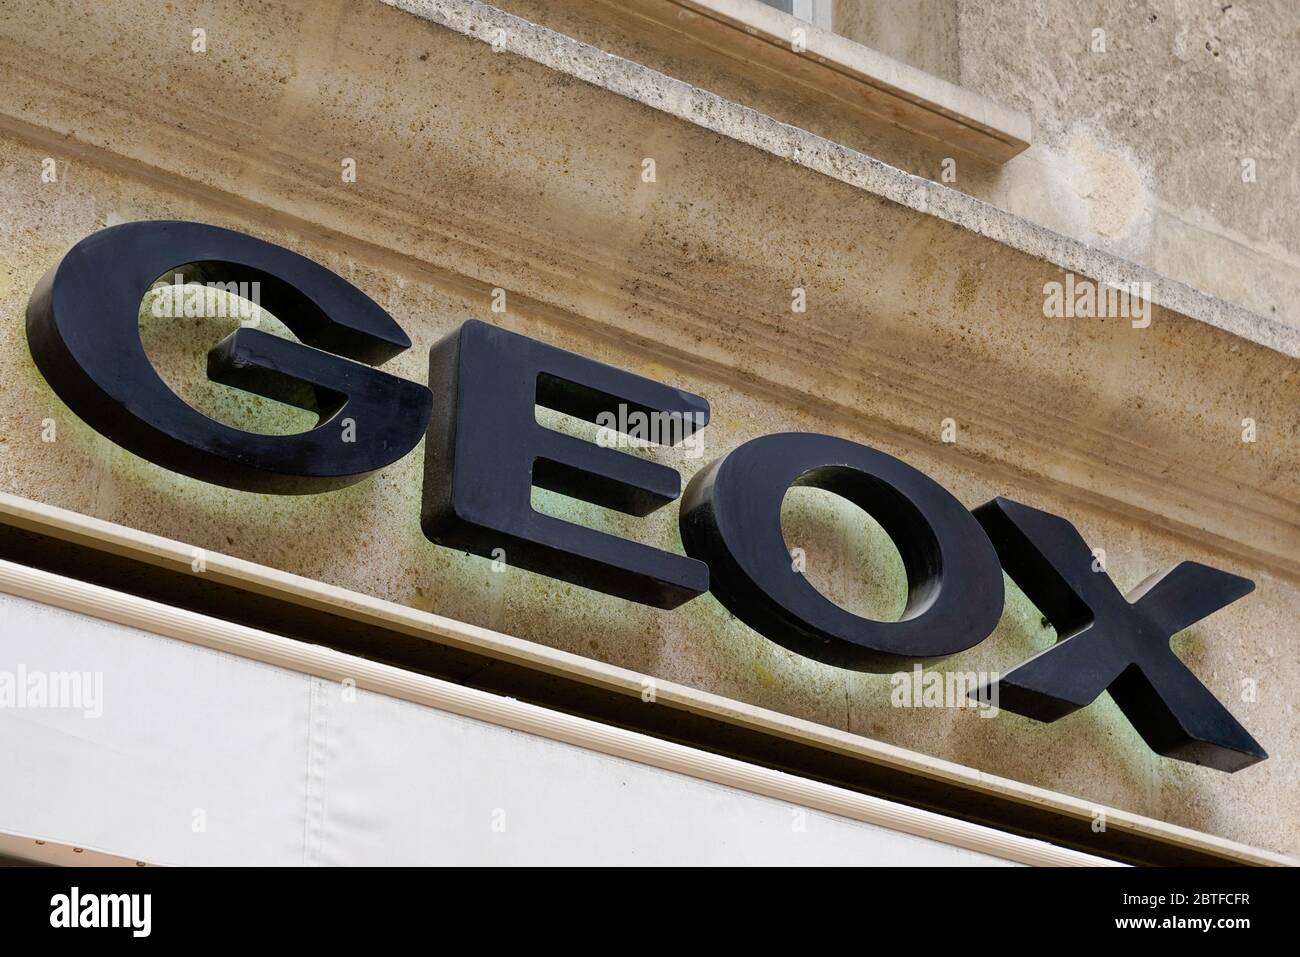 Bordeaux , Aquitaine / France - 05 05 2020 : Geox shoes store text shop  logo for Italian clothing Stock Photo - Alamy